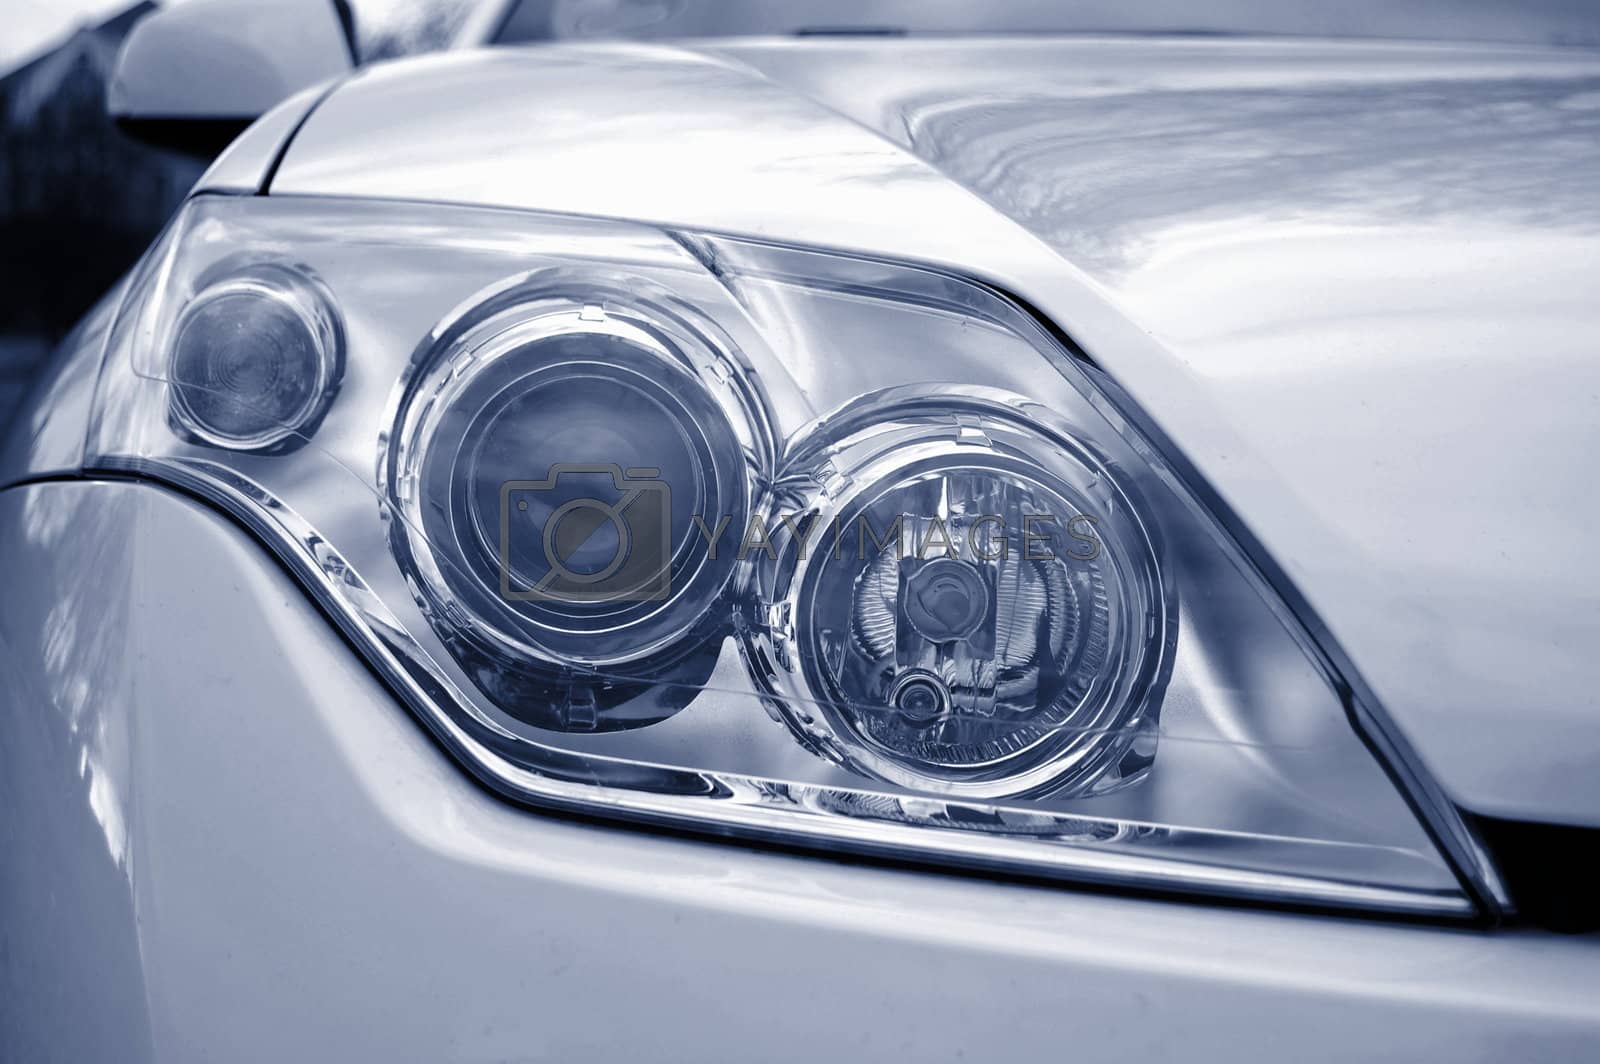 Royalty free image of headlight of a car by gunnar3000